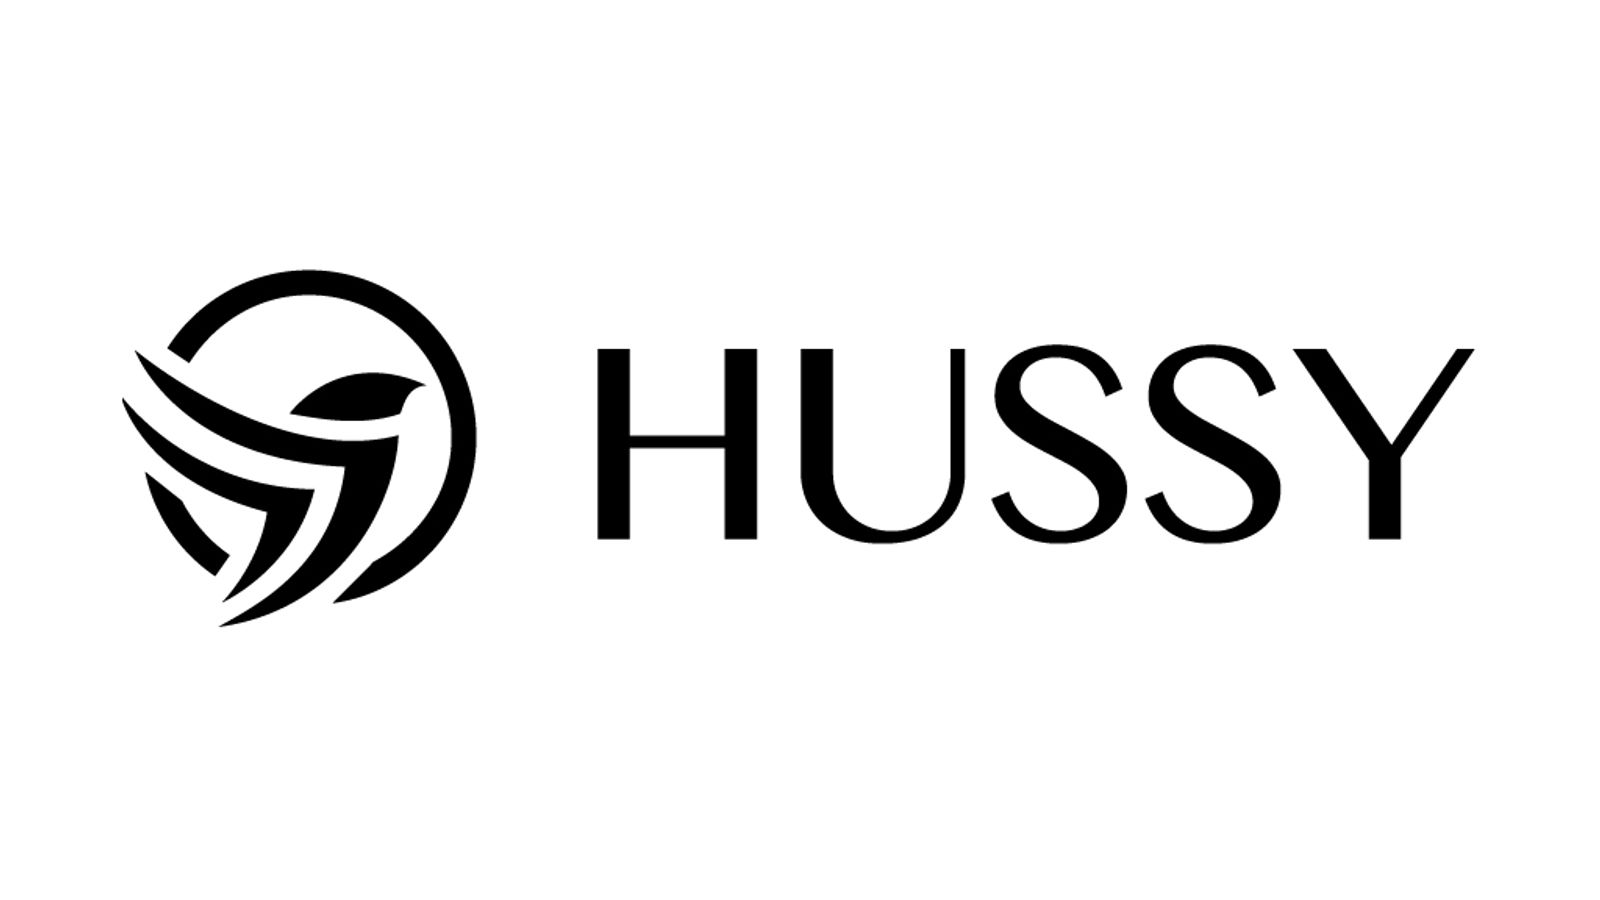 HUSSY.io Claims Infrastructure Will Be Resistant to FOSTA/SESTA